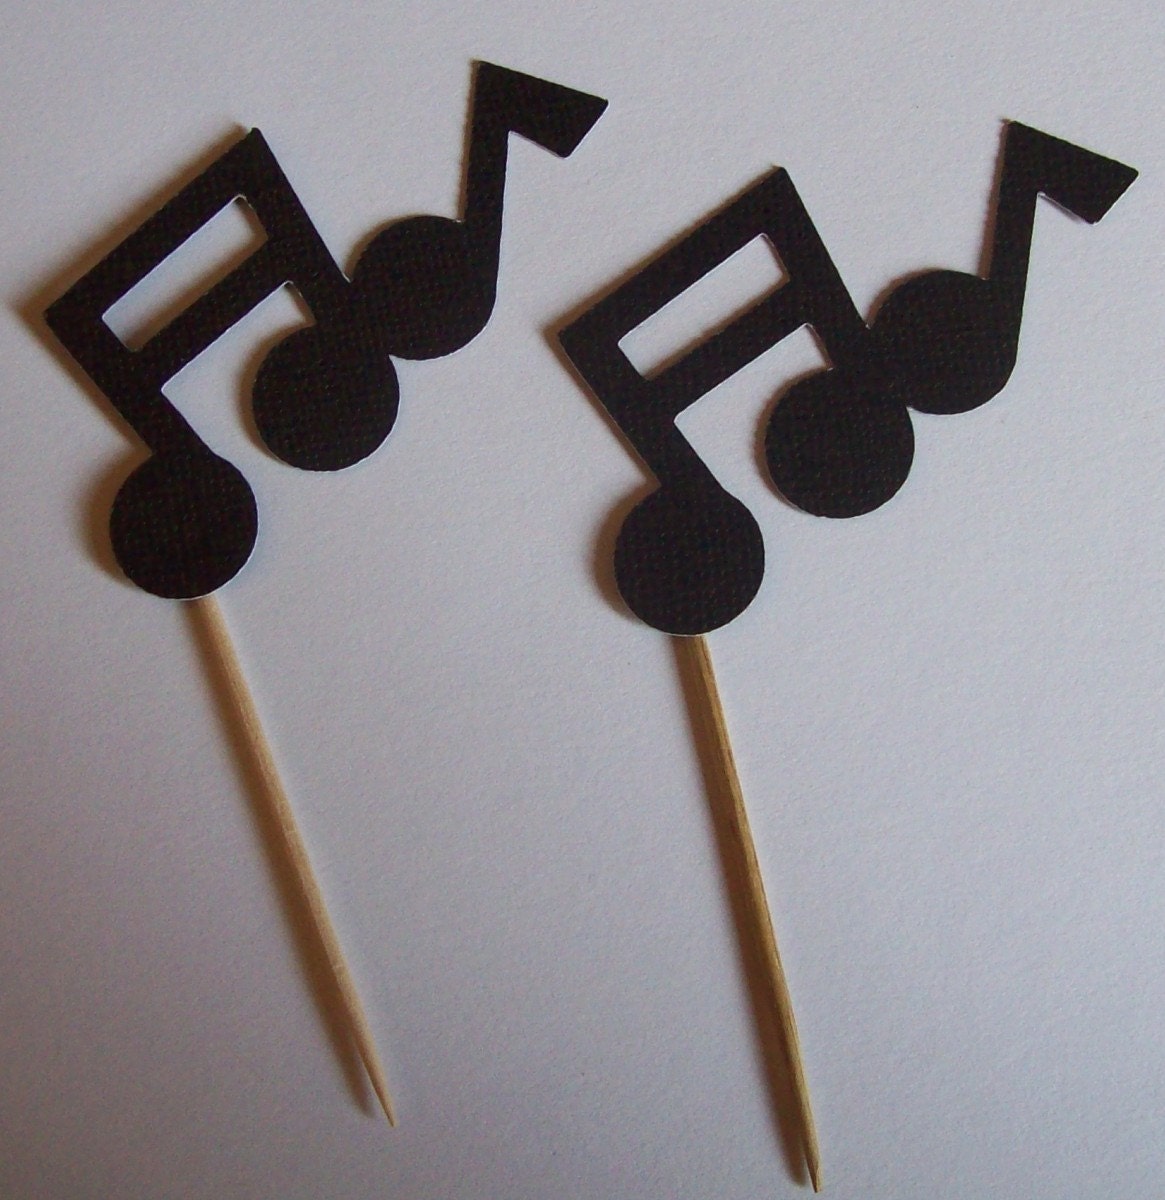 Musical Note Cupcake Toppers By Twocraftycreations On Etsy